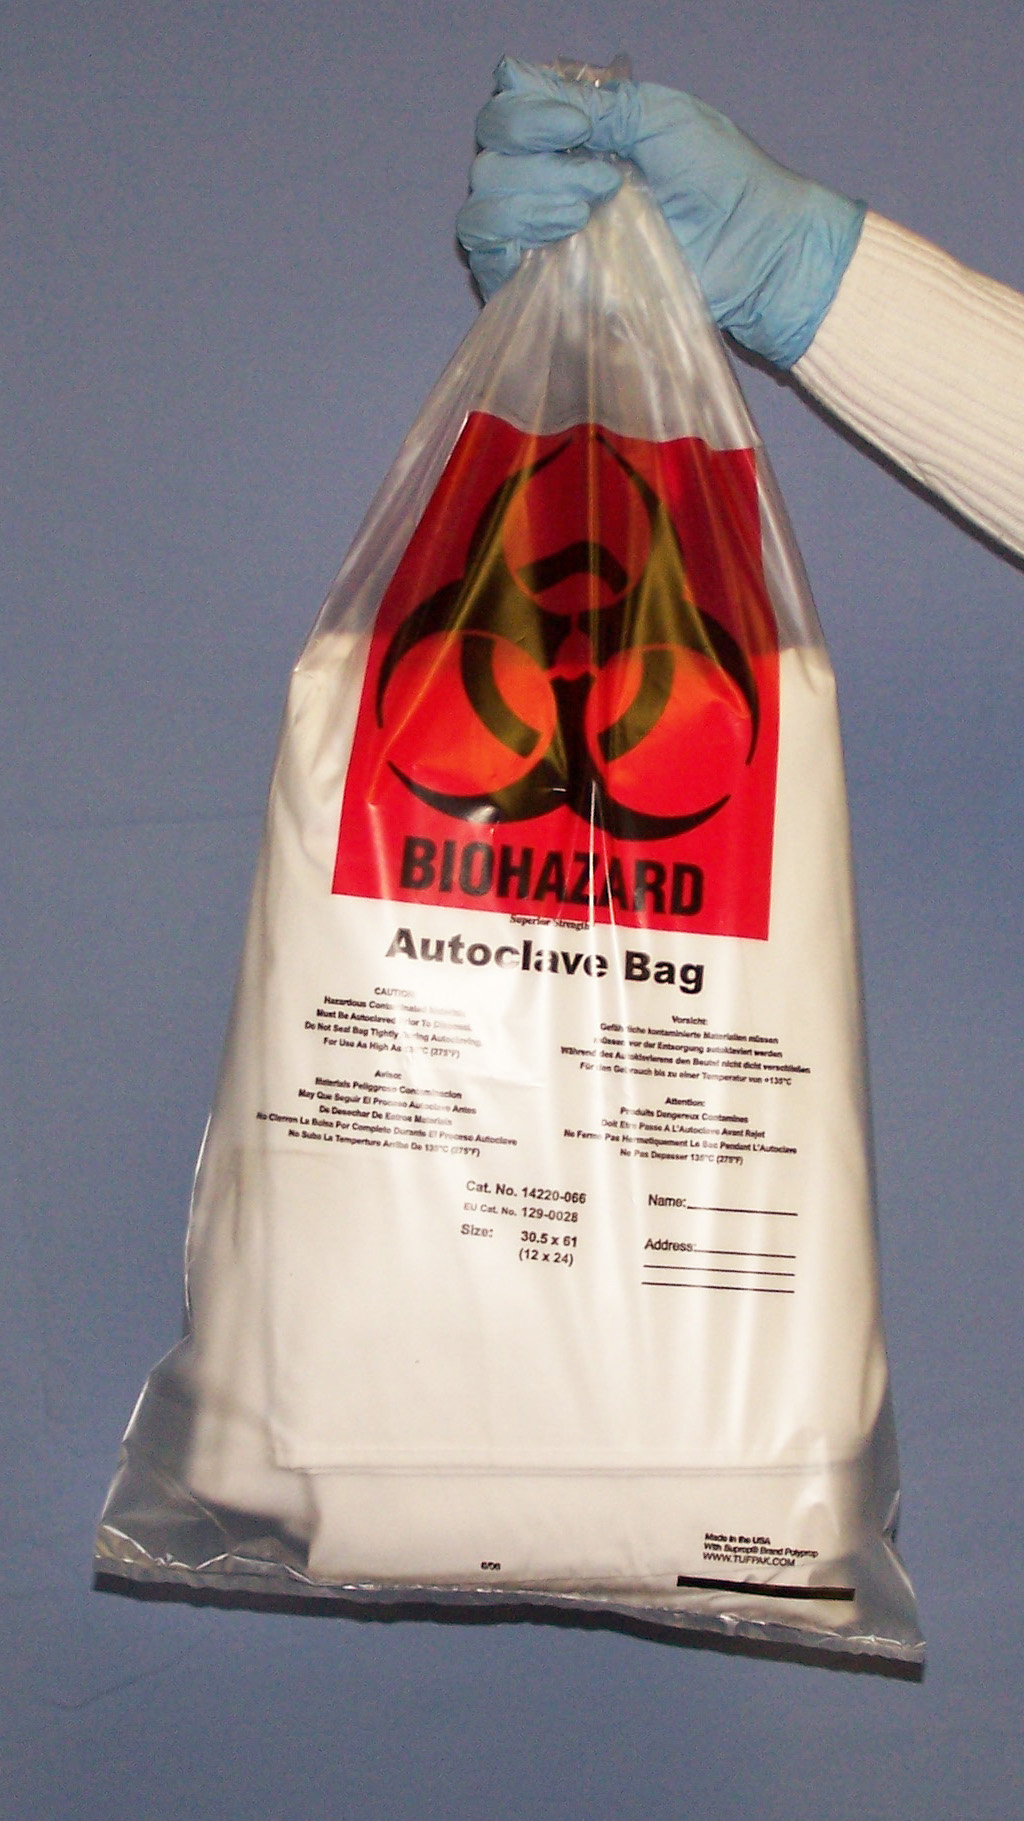 BIOHAZARD AUTOCLAVE BAGS 24X30 IN. CLEAR PP